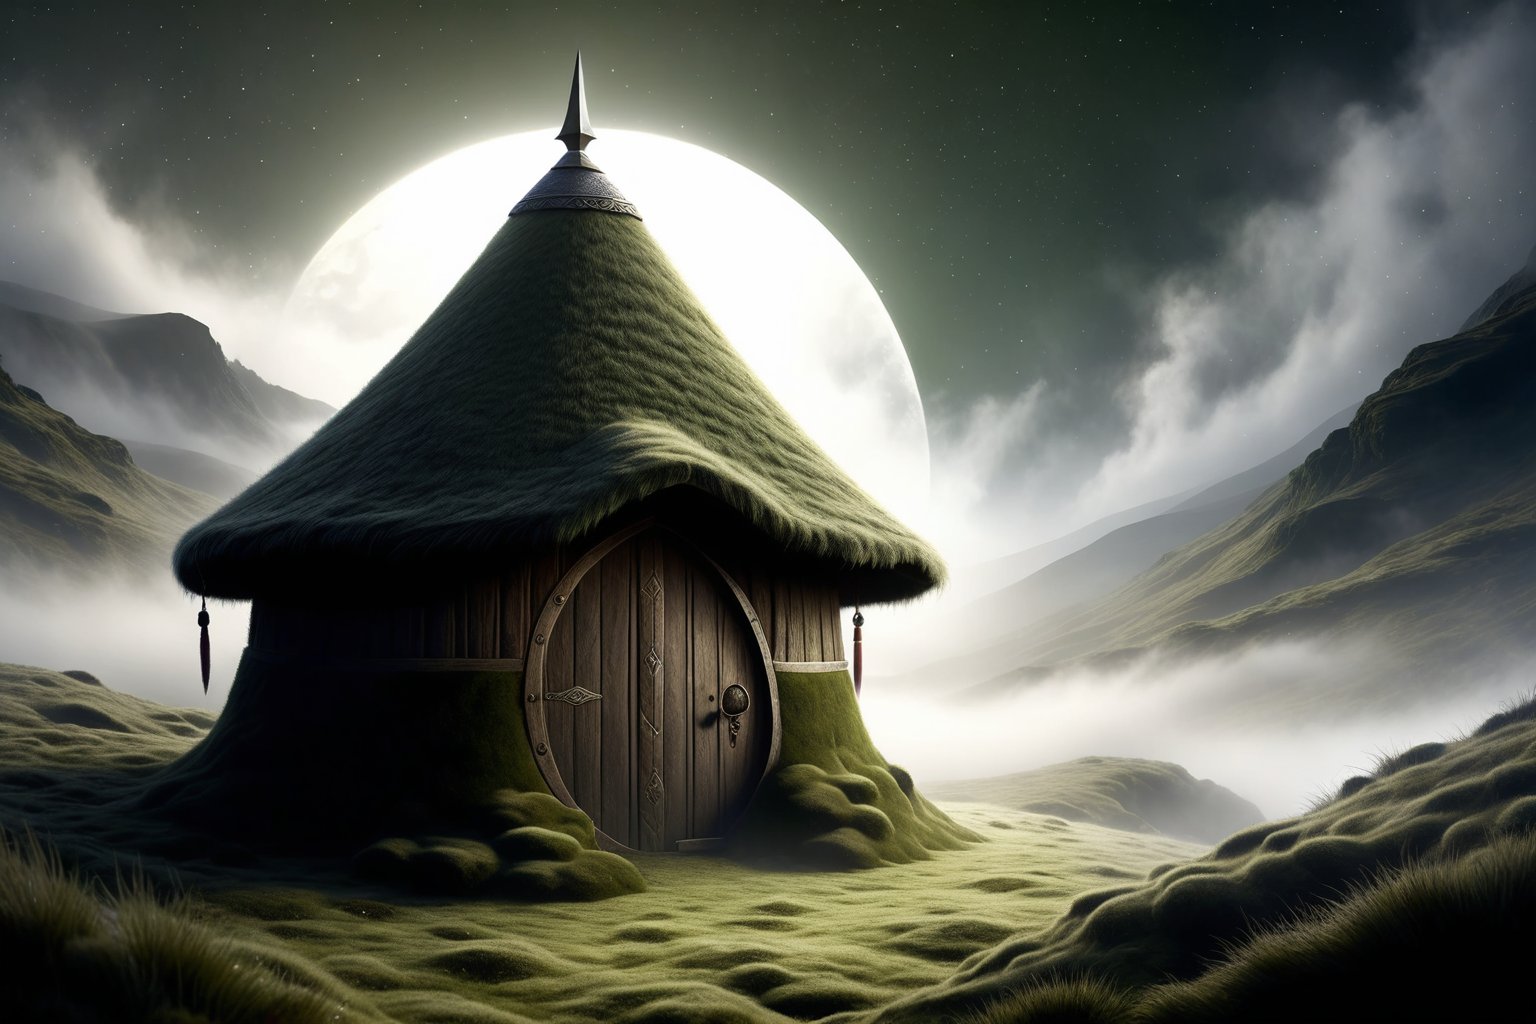 Imagine the following scene.
A crescent-shaped sword cleaves the eyes.
in wool and a mystical moss grass hut hidden deep in a misty valley stands at the door
cut bleed in dark sky.
DonMW15pXL